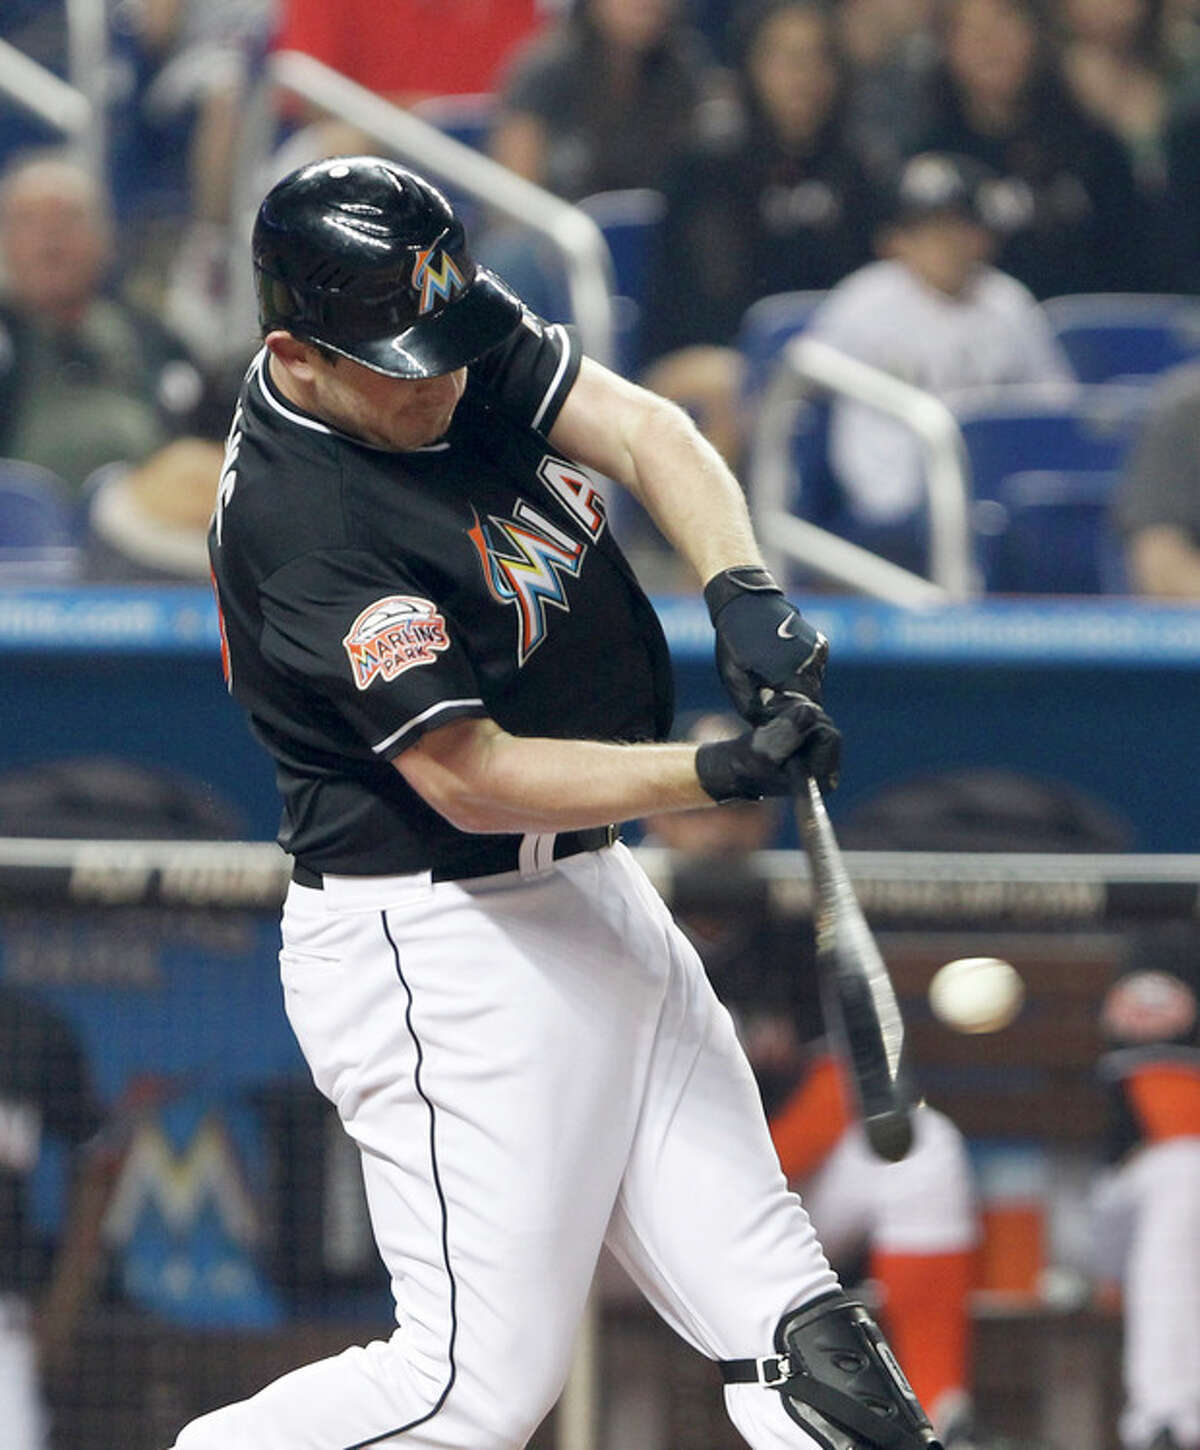 Miami Marlins' Austin Kearns hits a home run, scoring Omar Infante, during the first inning of a baseball game against the New York Mets, Friday, May 11, 2012, in Miami. (AP Photo/Wilfredo Lee)